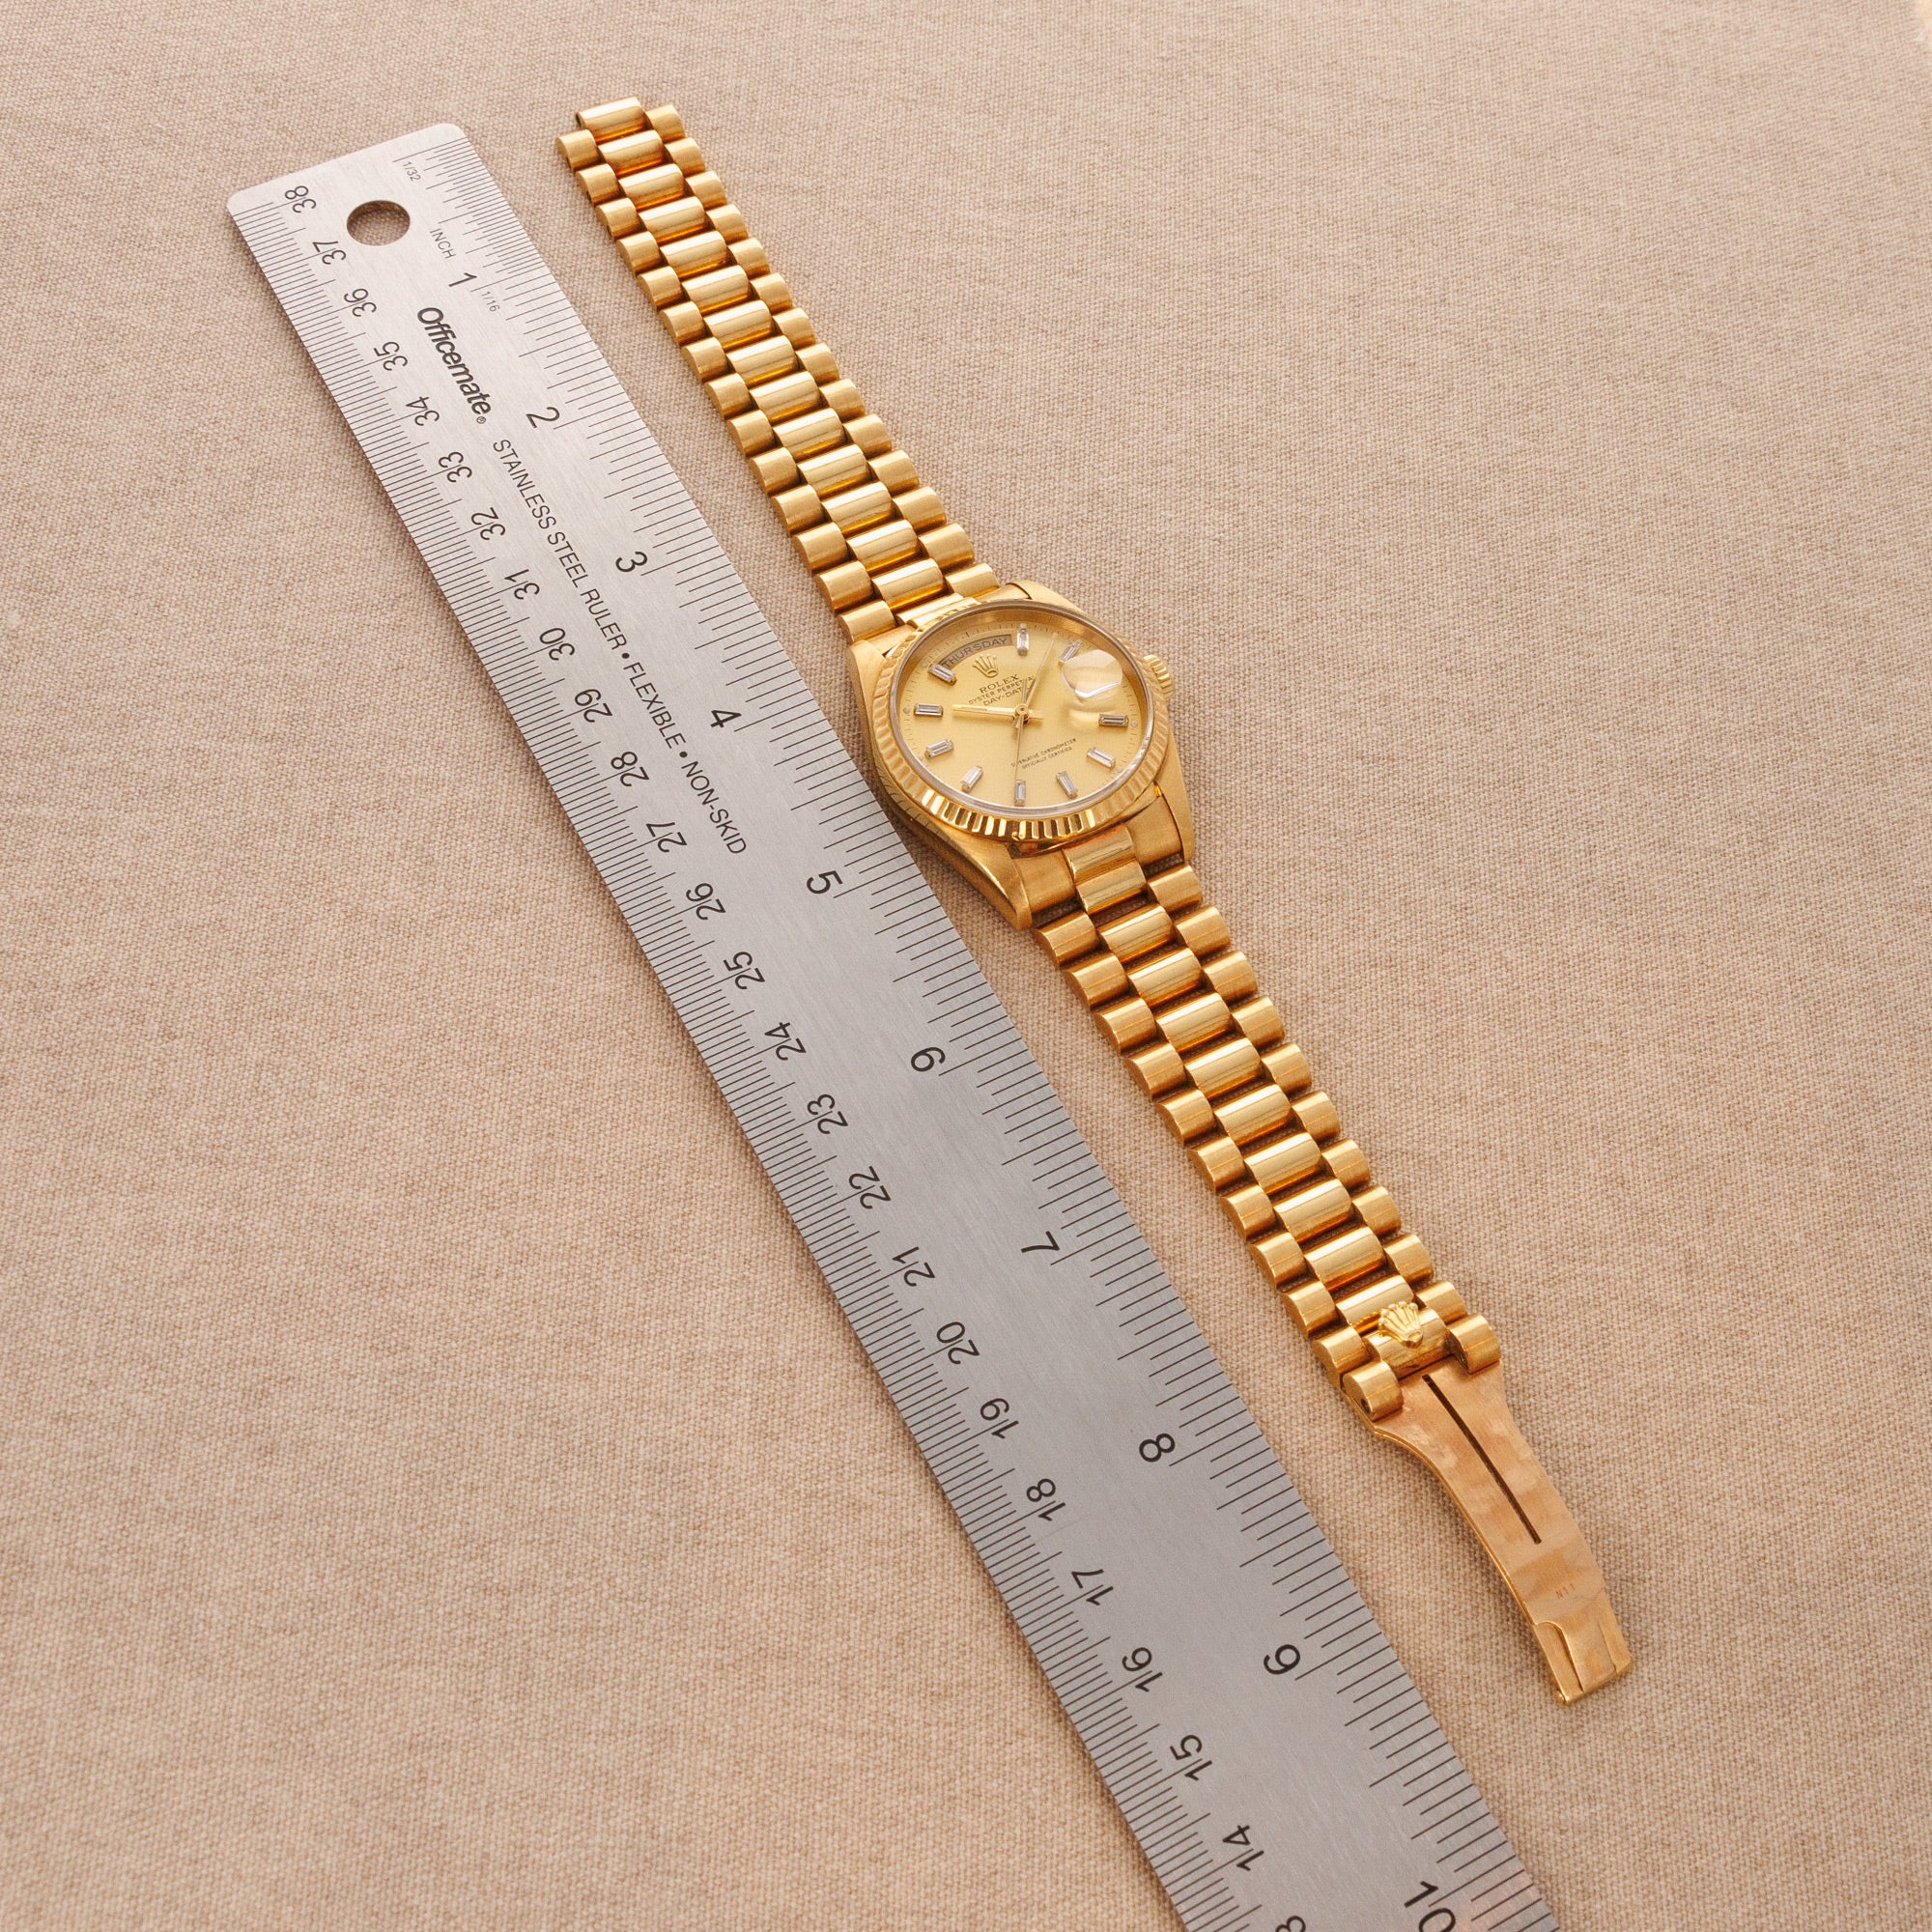 Rolex - Rolex Yellow Gold Day-Date Ref. 18238 with Baguette Diamond Dials - The Keystone Watches